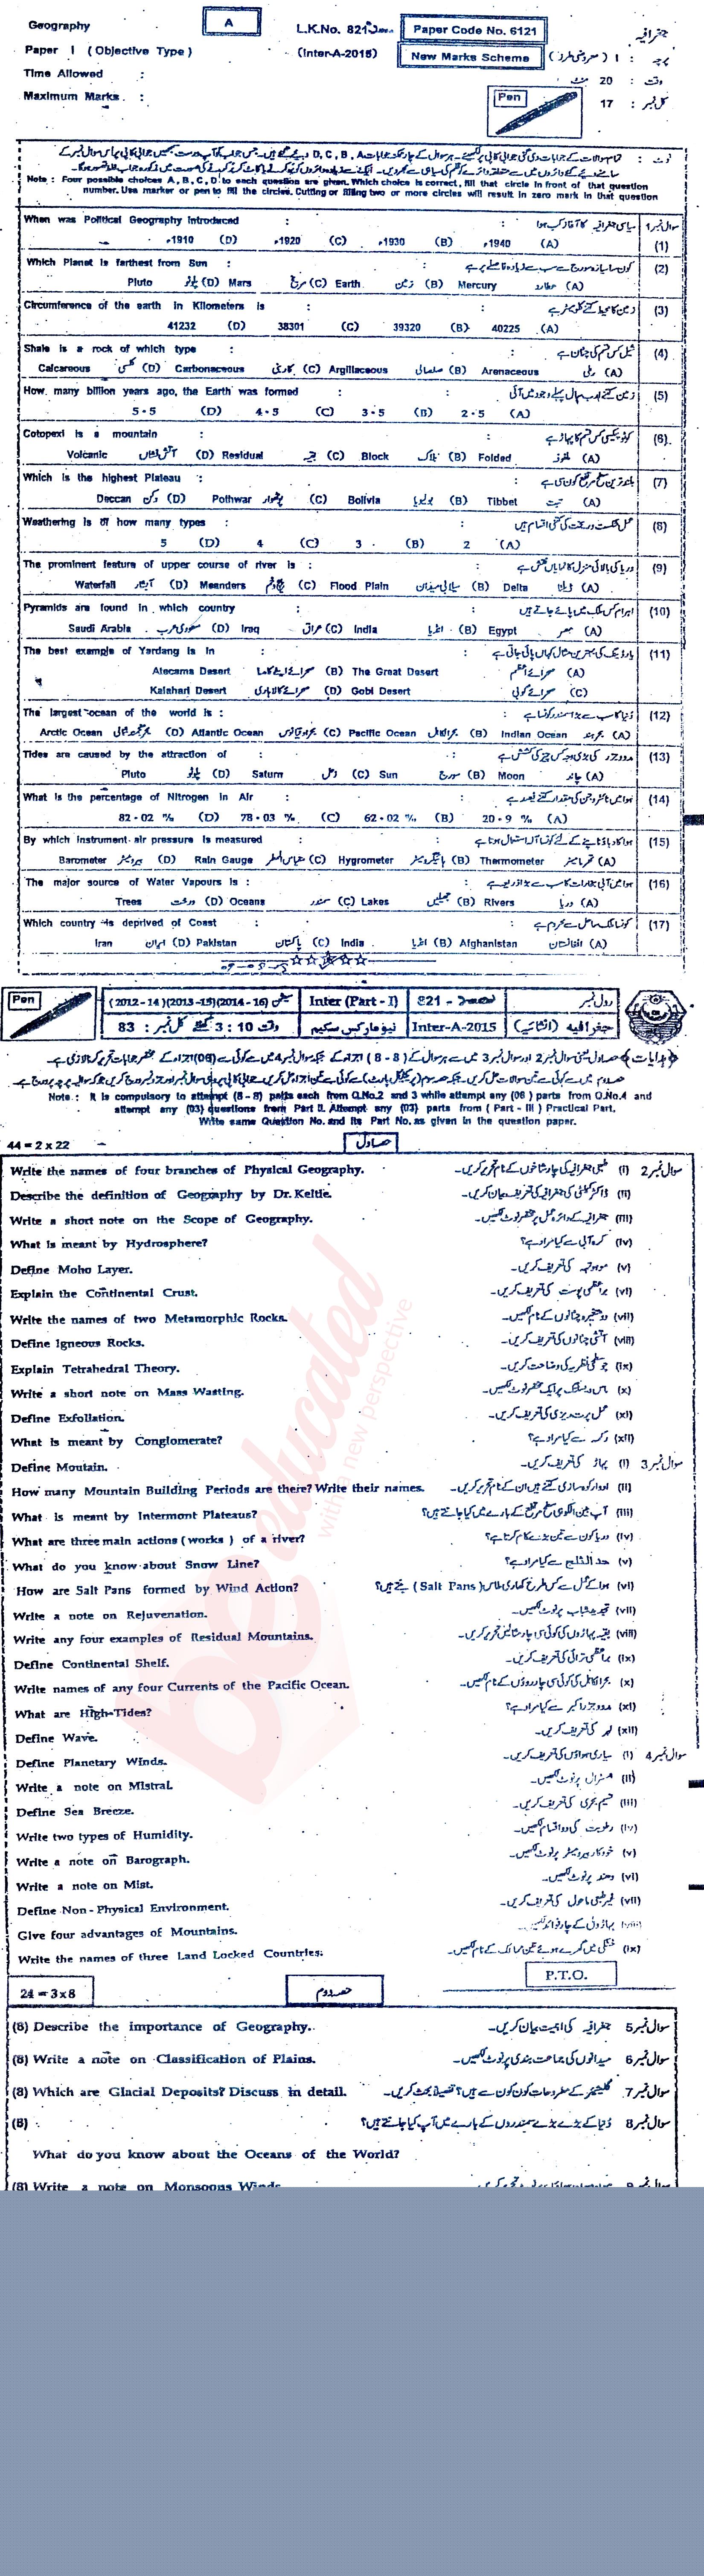 Commercial Geography FA Part 1 Past Paper Group 1 BISE Bahawalpur 2015